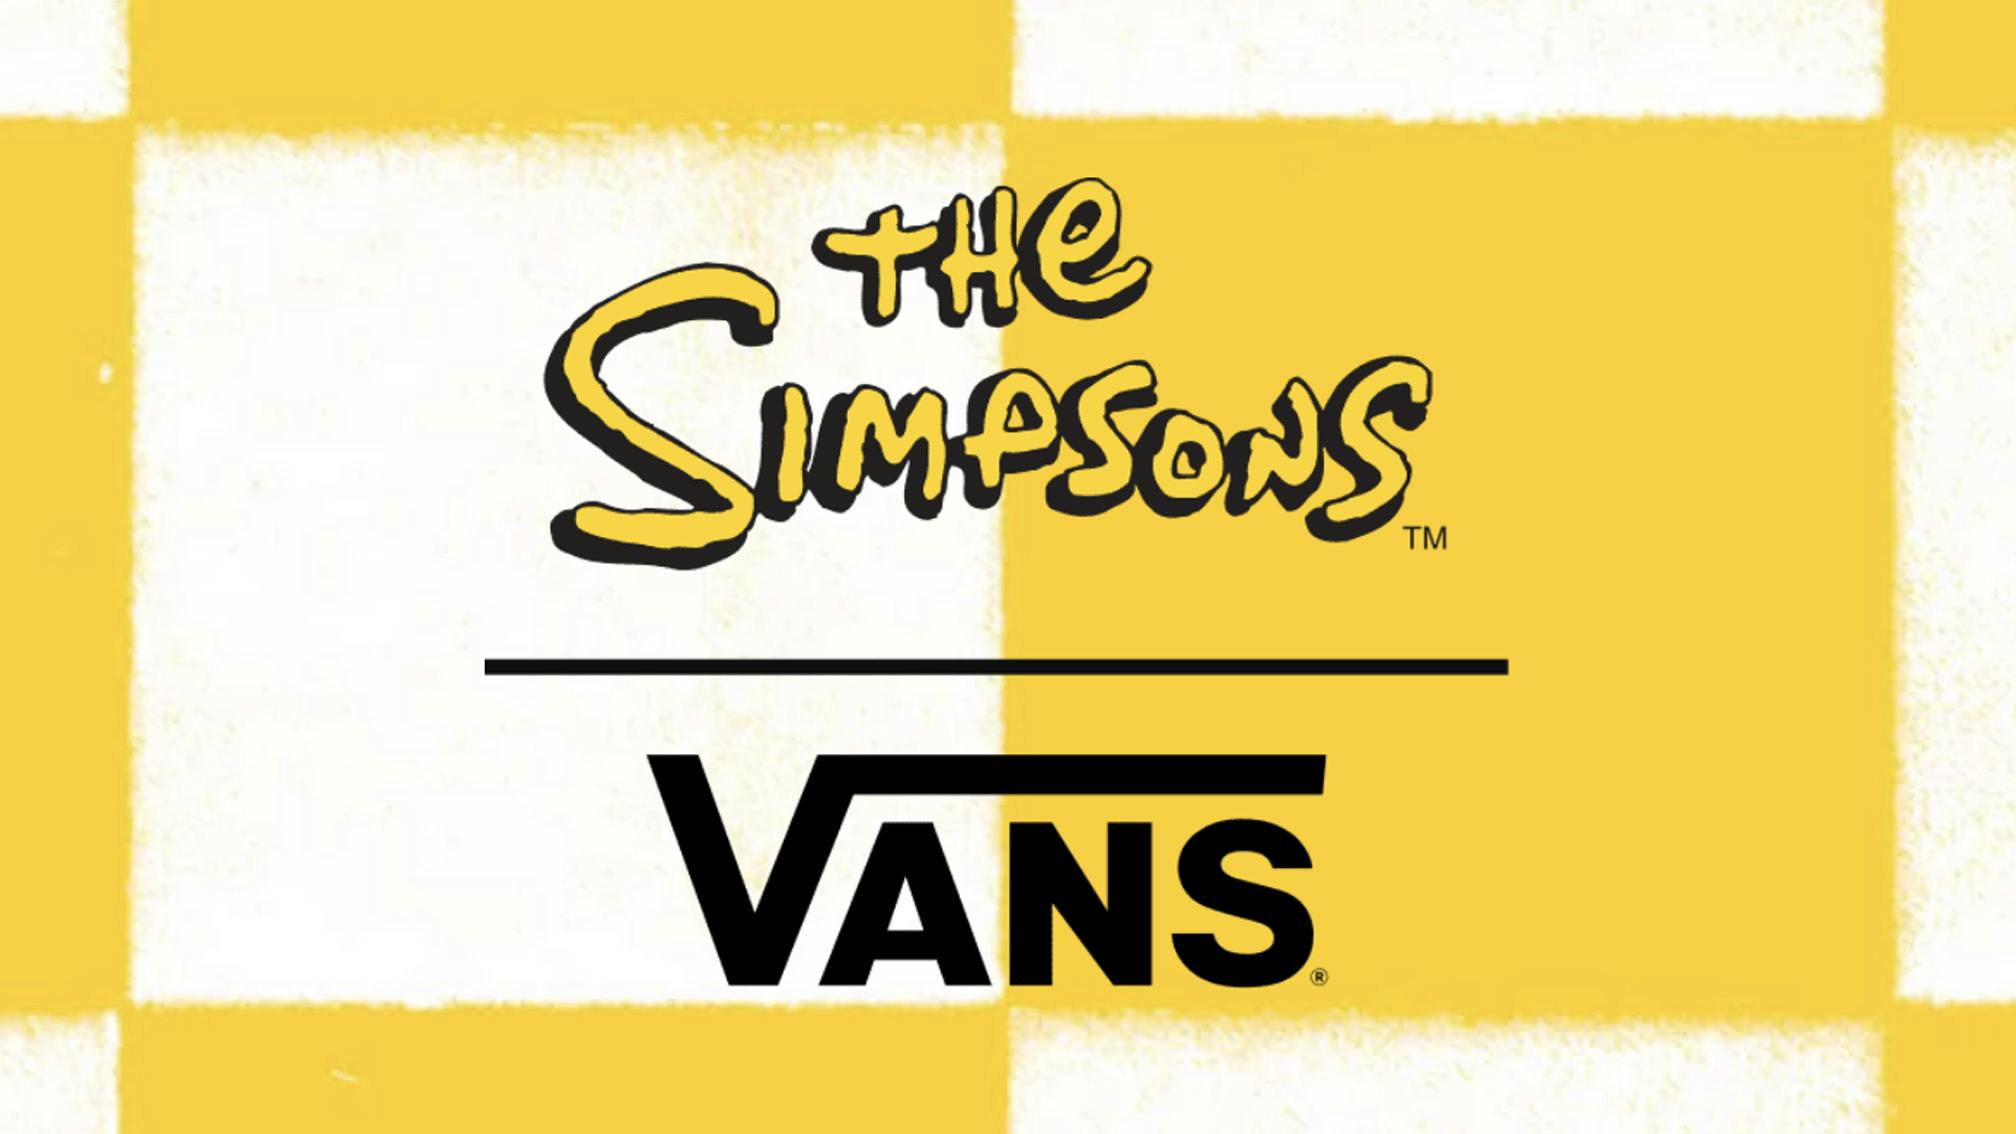 Vans Announce New Collaboration With The Simpsons